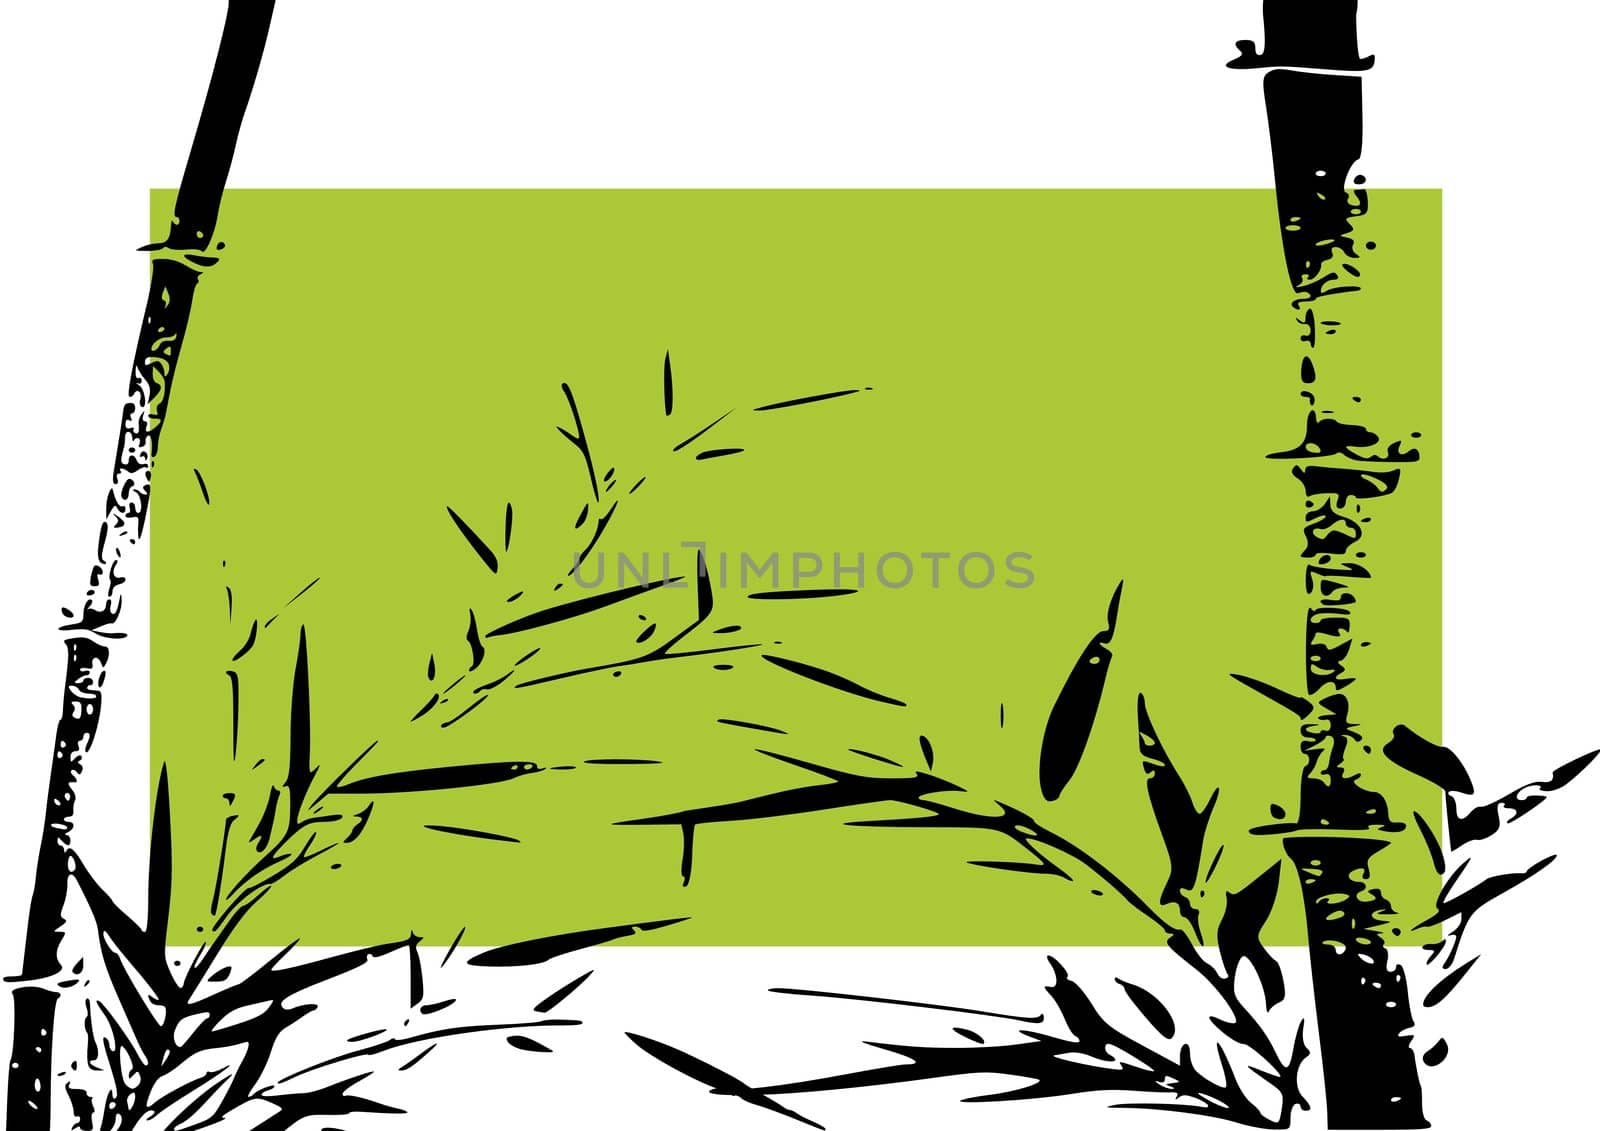 Abstract bamboo illustration with green element on white background.